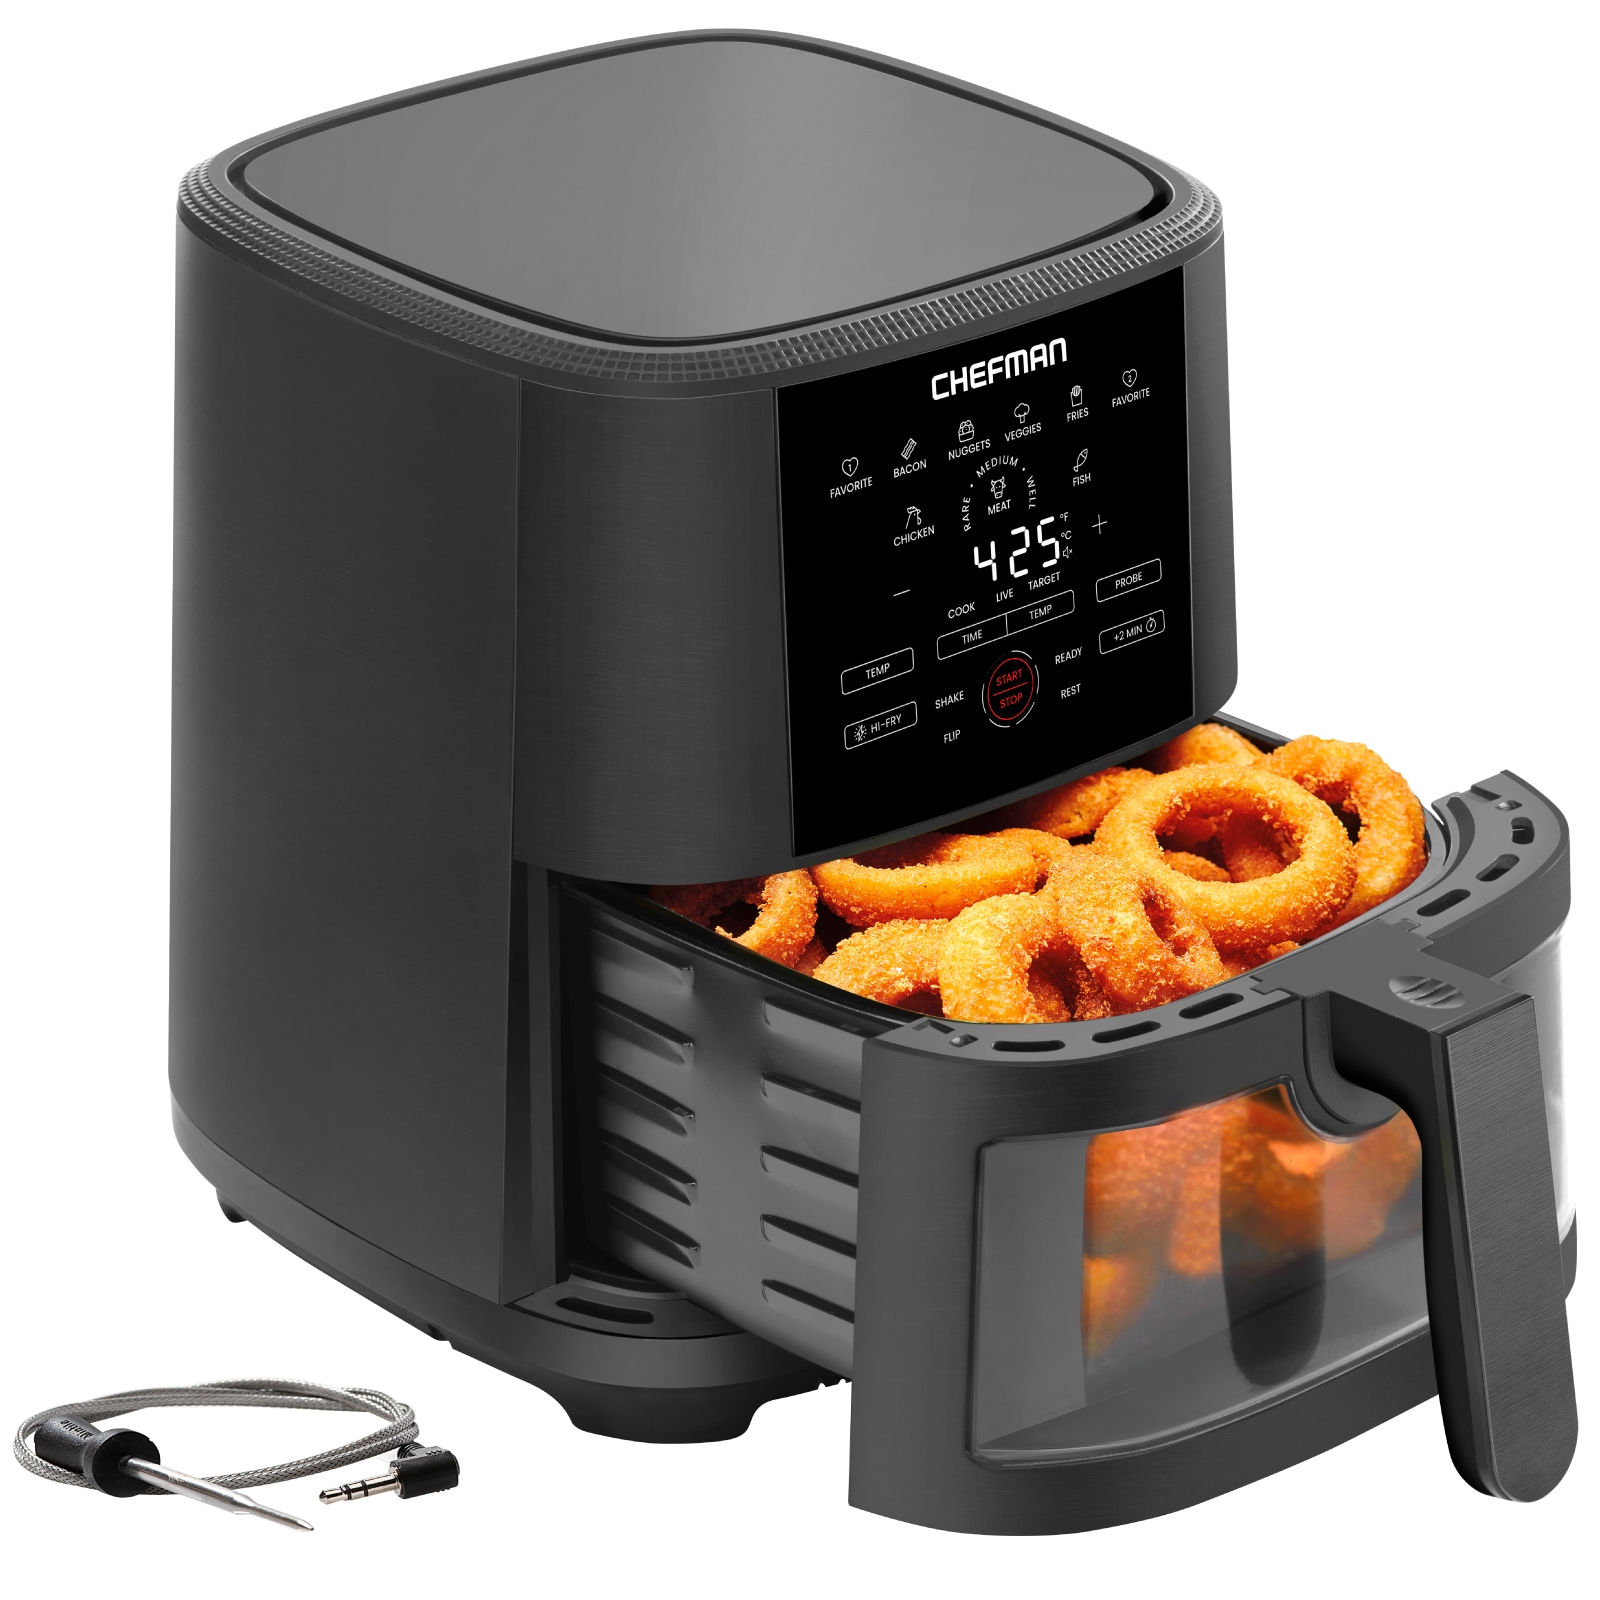 Chefman Air Fryer Toaster Oven Combo w/ Probe Thermometer, 9-in-1